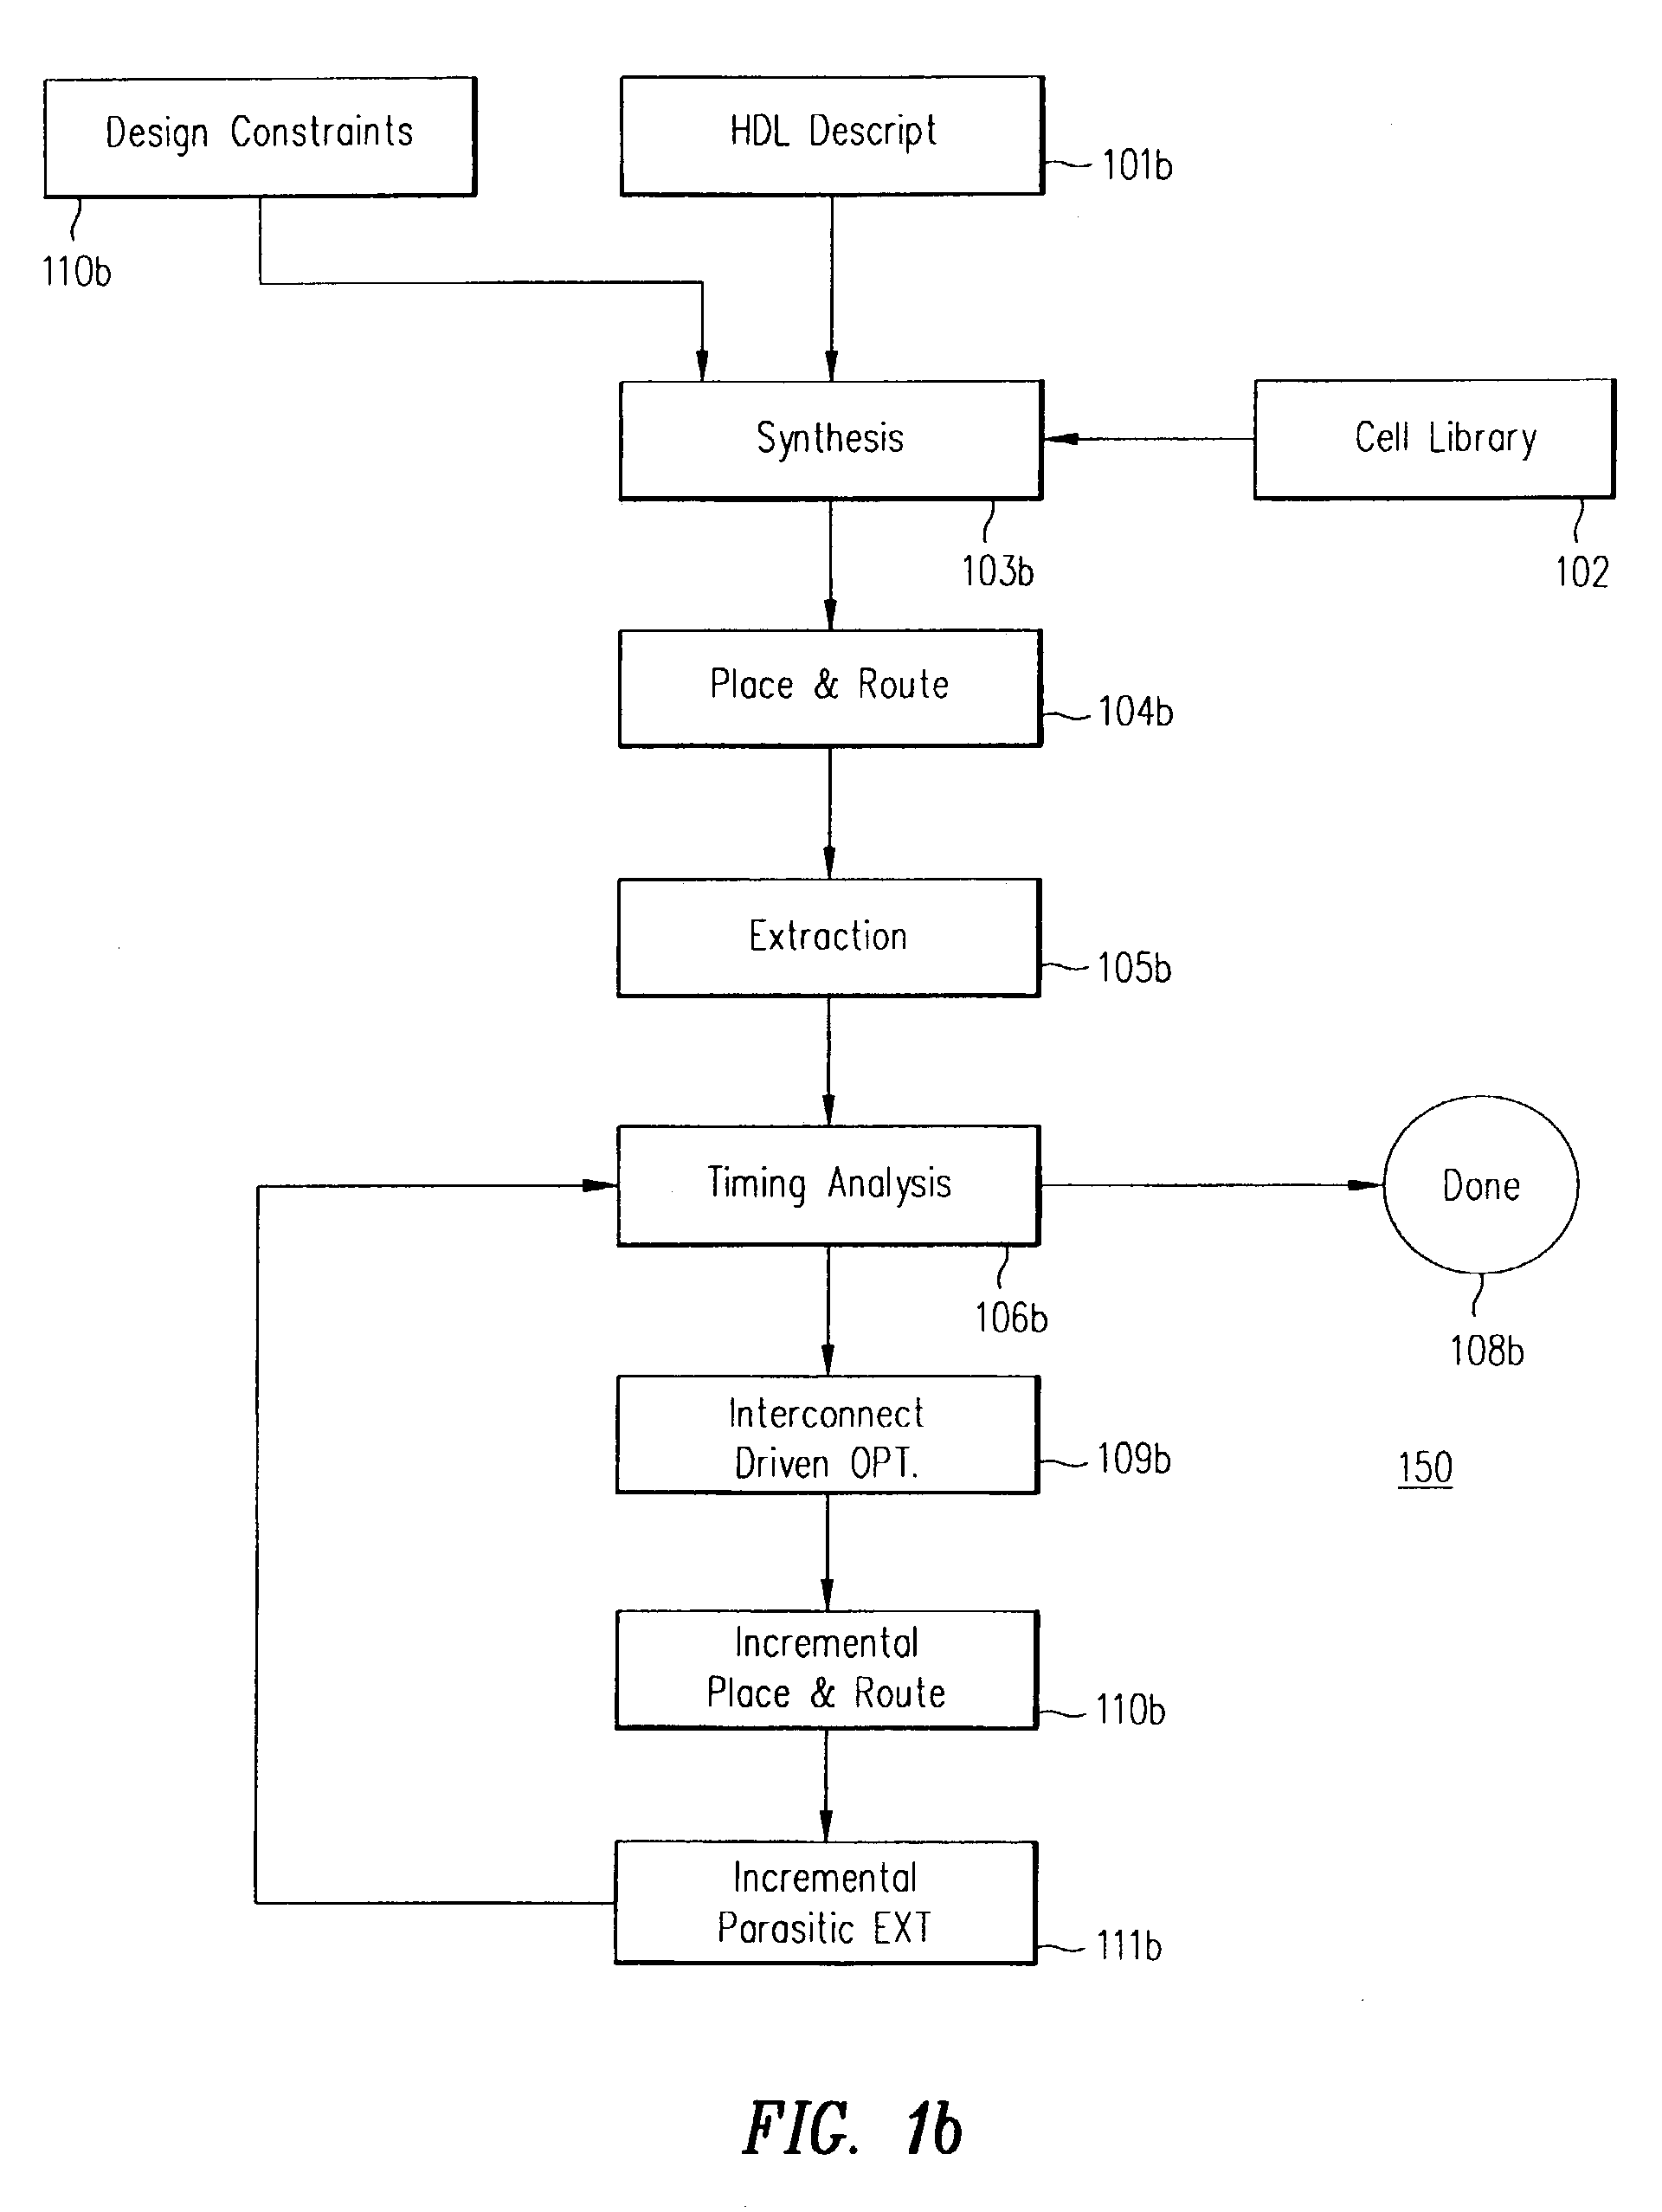 Method and apparatus for interconnect-driven optimization of integrated circuit design